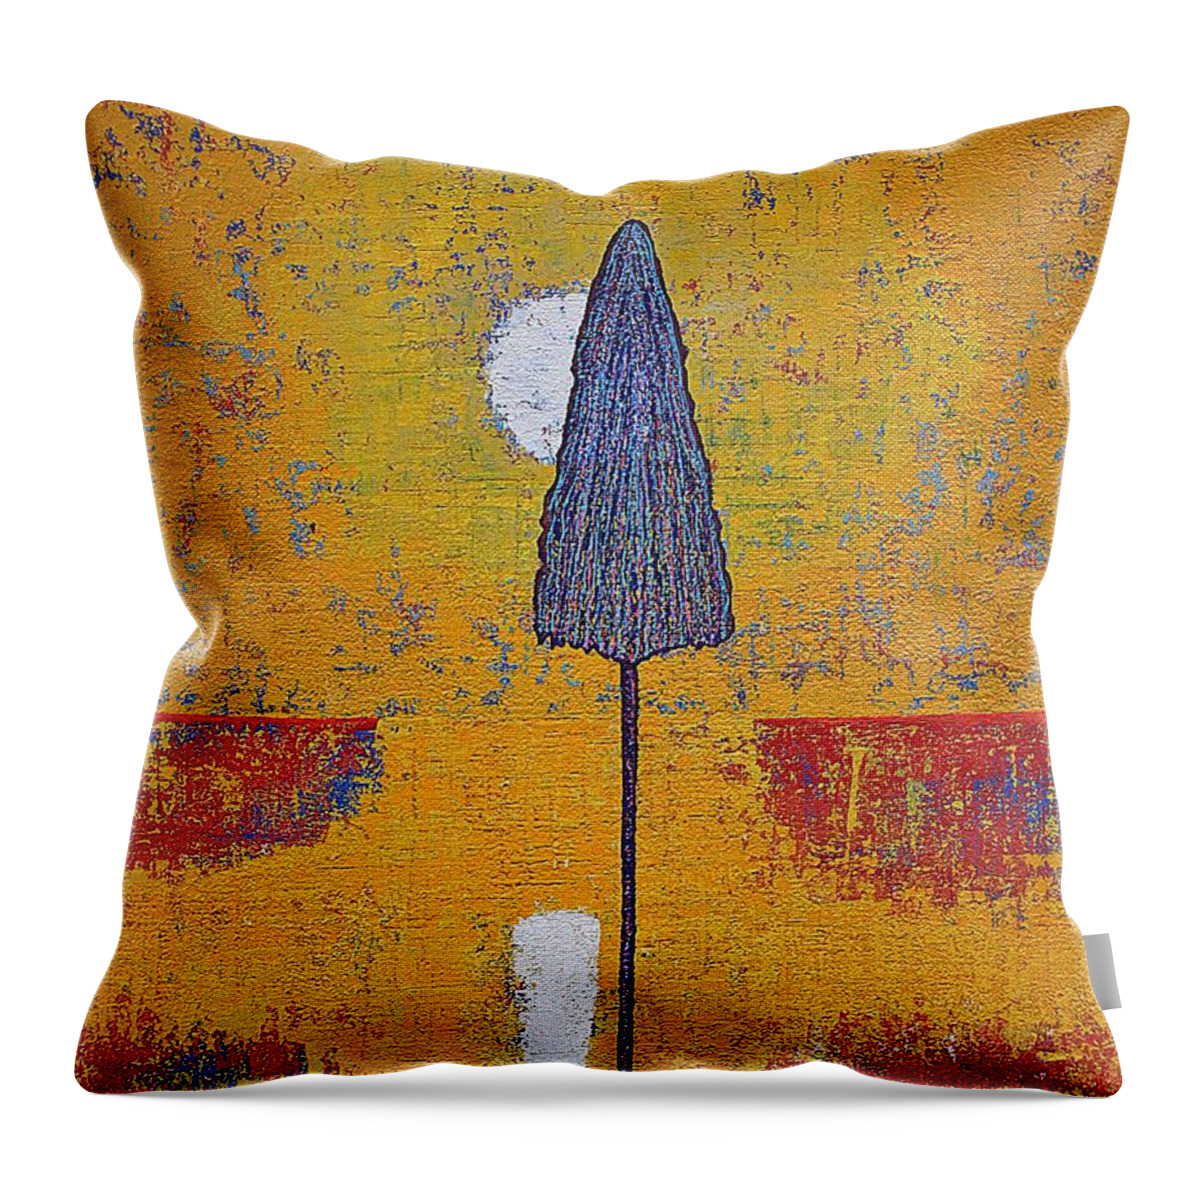 Sunrise Throw Pillow featuring the painting Another Day at the Office original painting by Sol Luckman